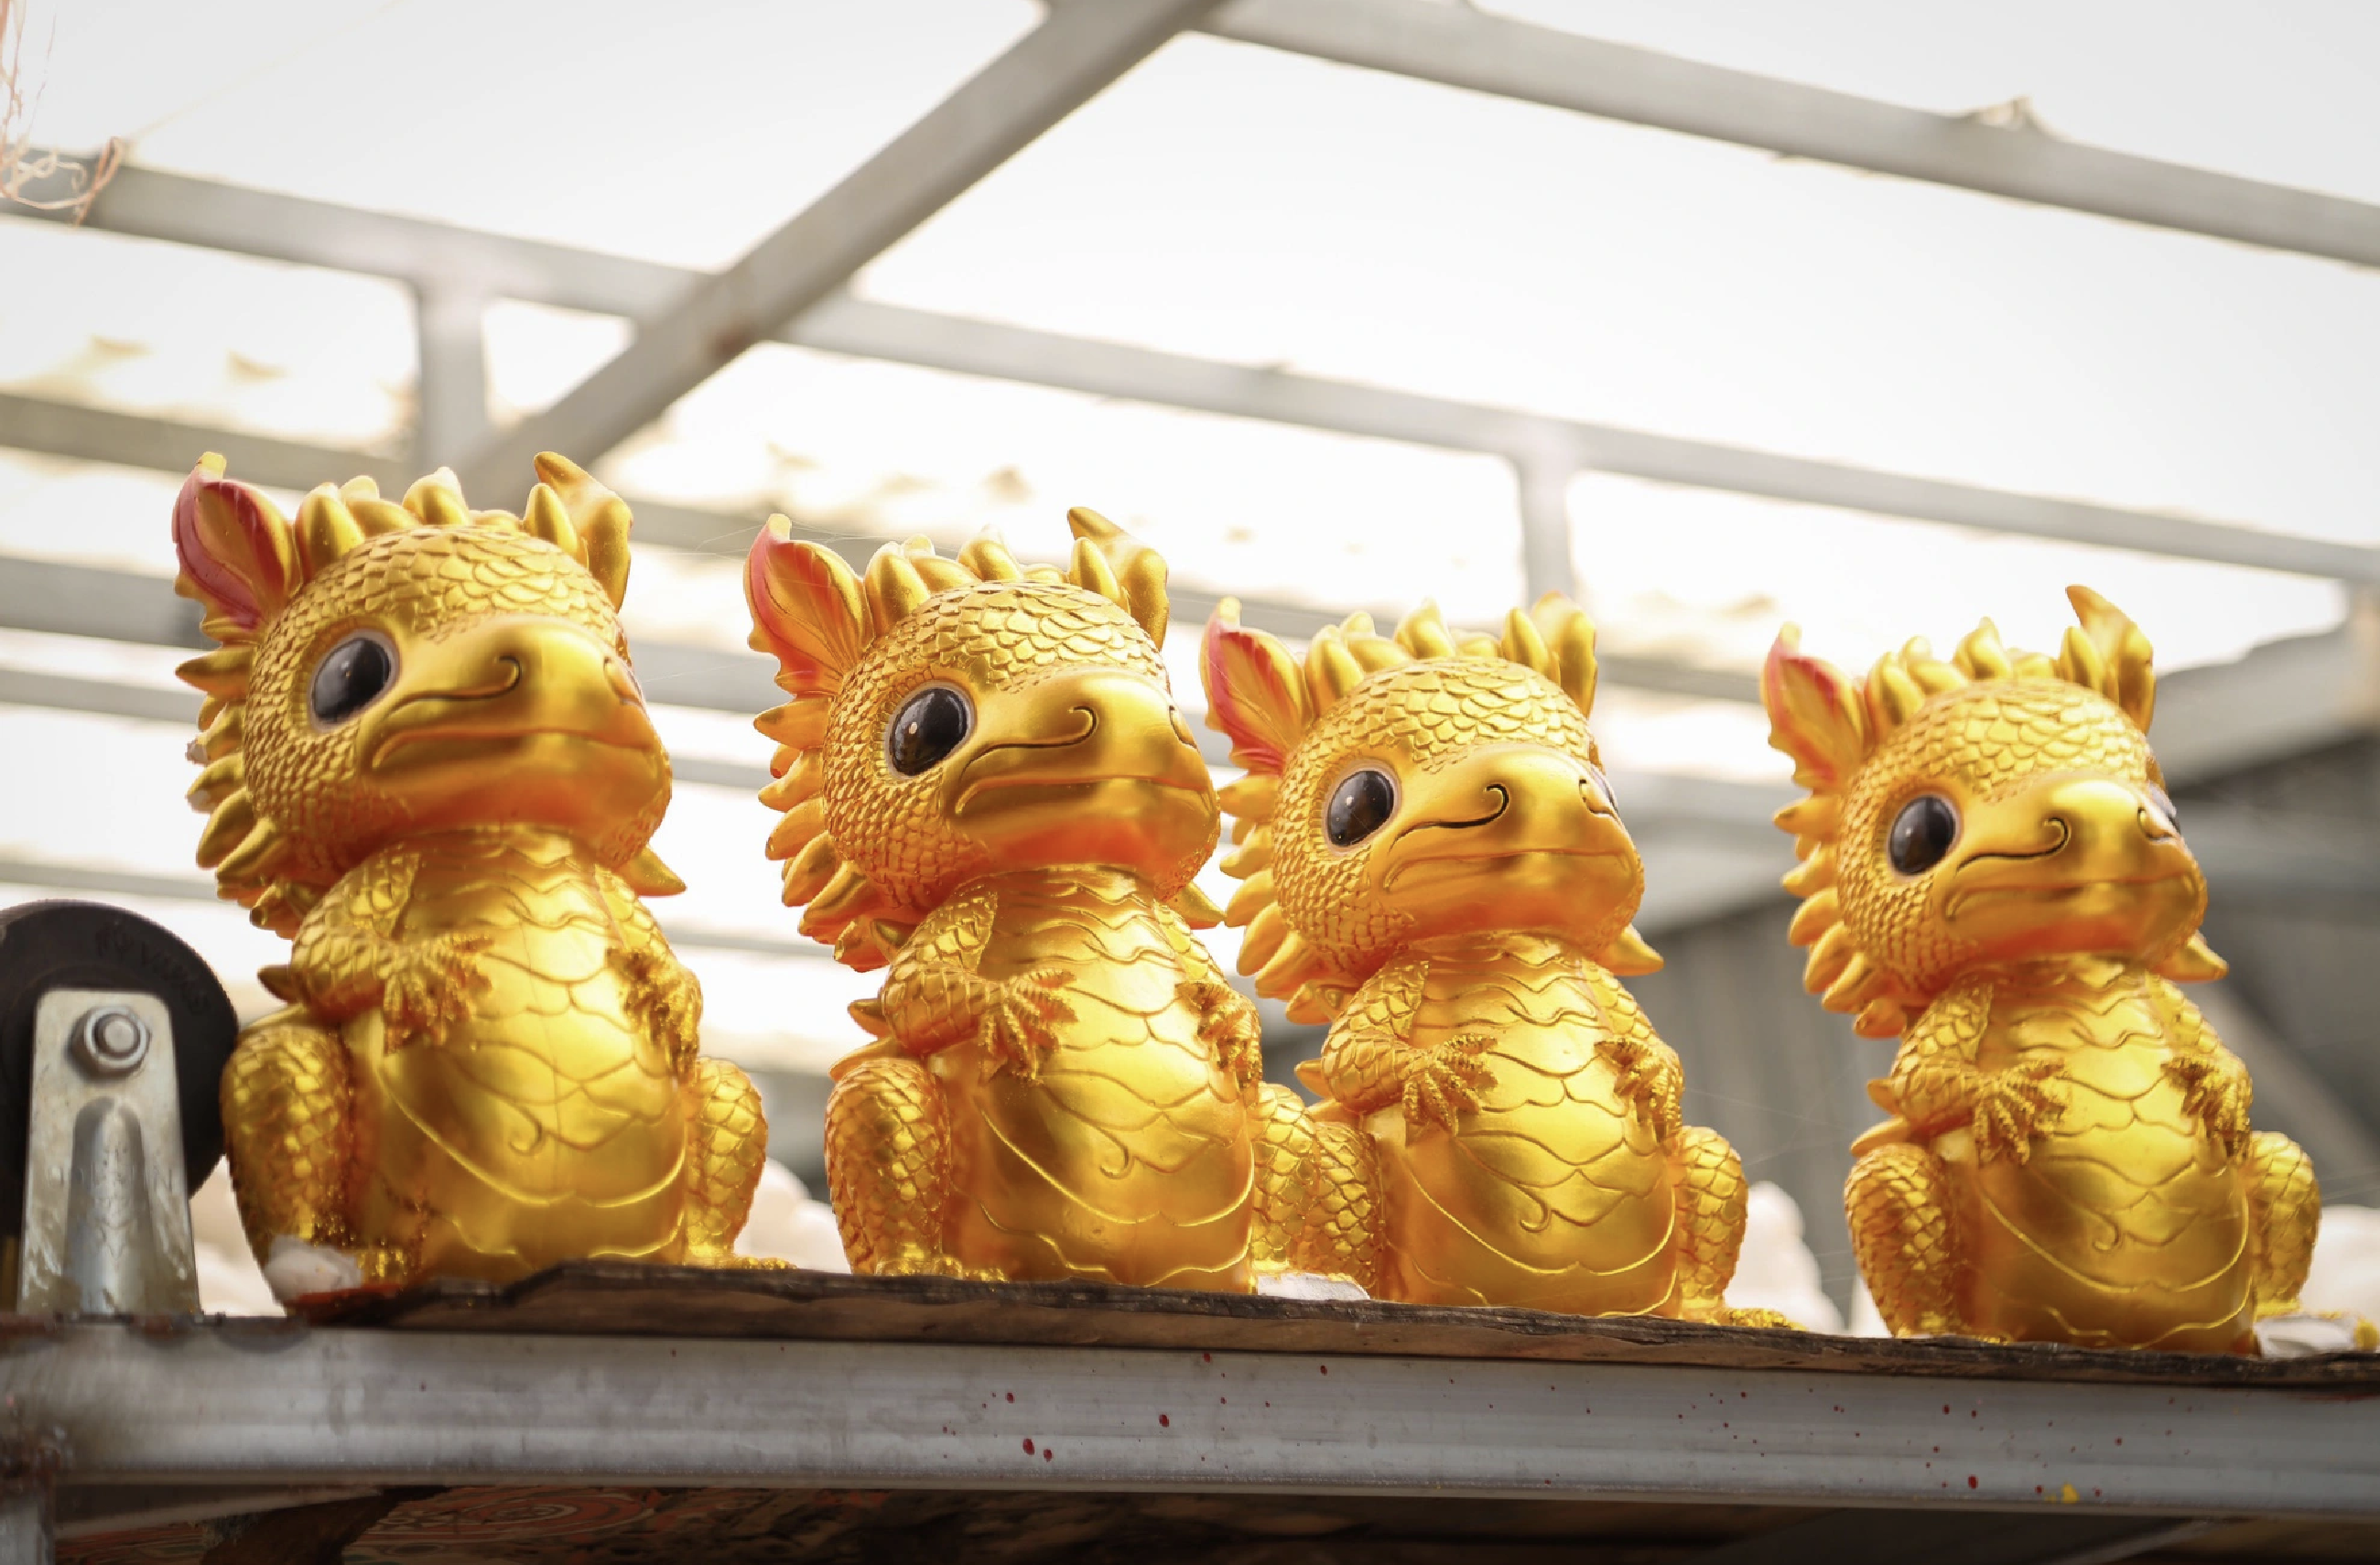 Piggy banks in the shape of an animated dragon are put on a shelf. Photo: P.Q. / Tuoi Tre